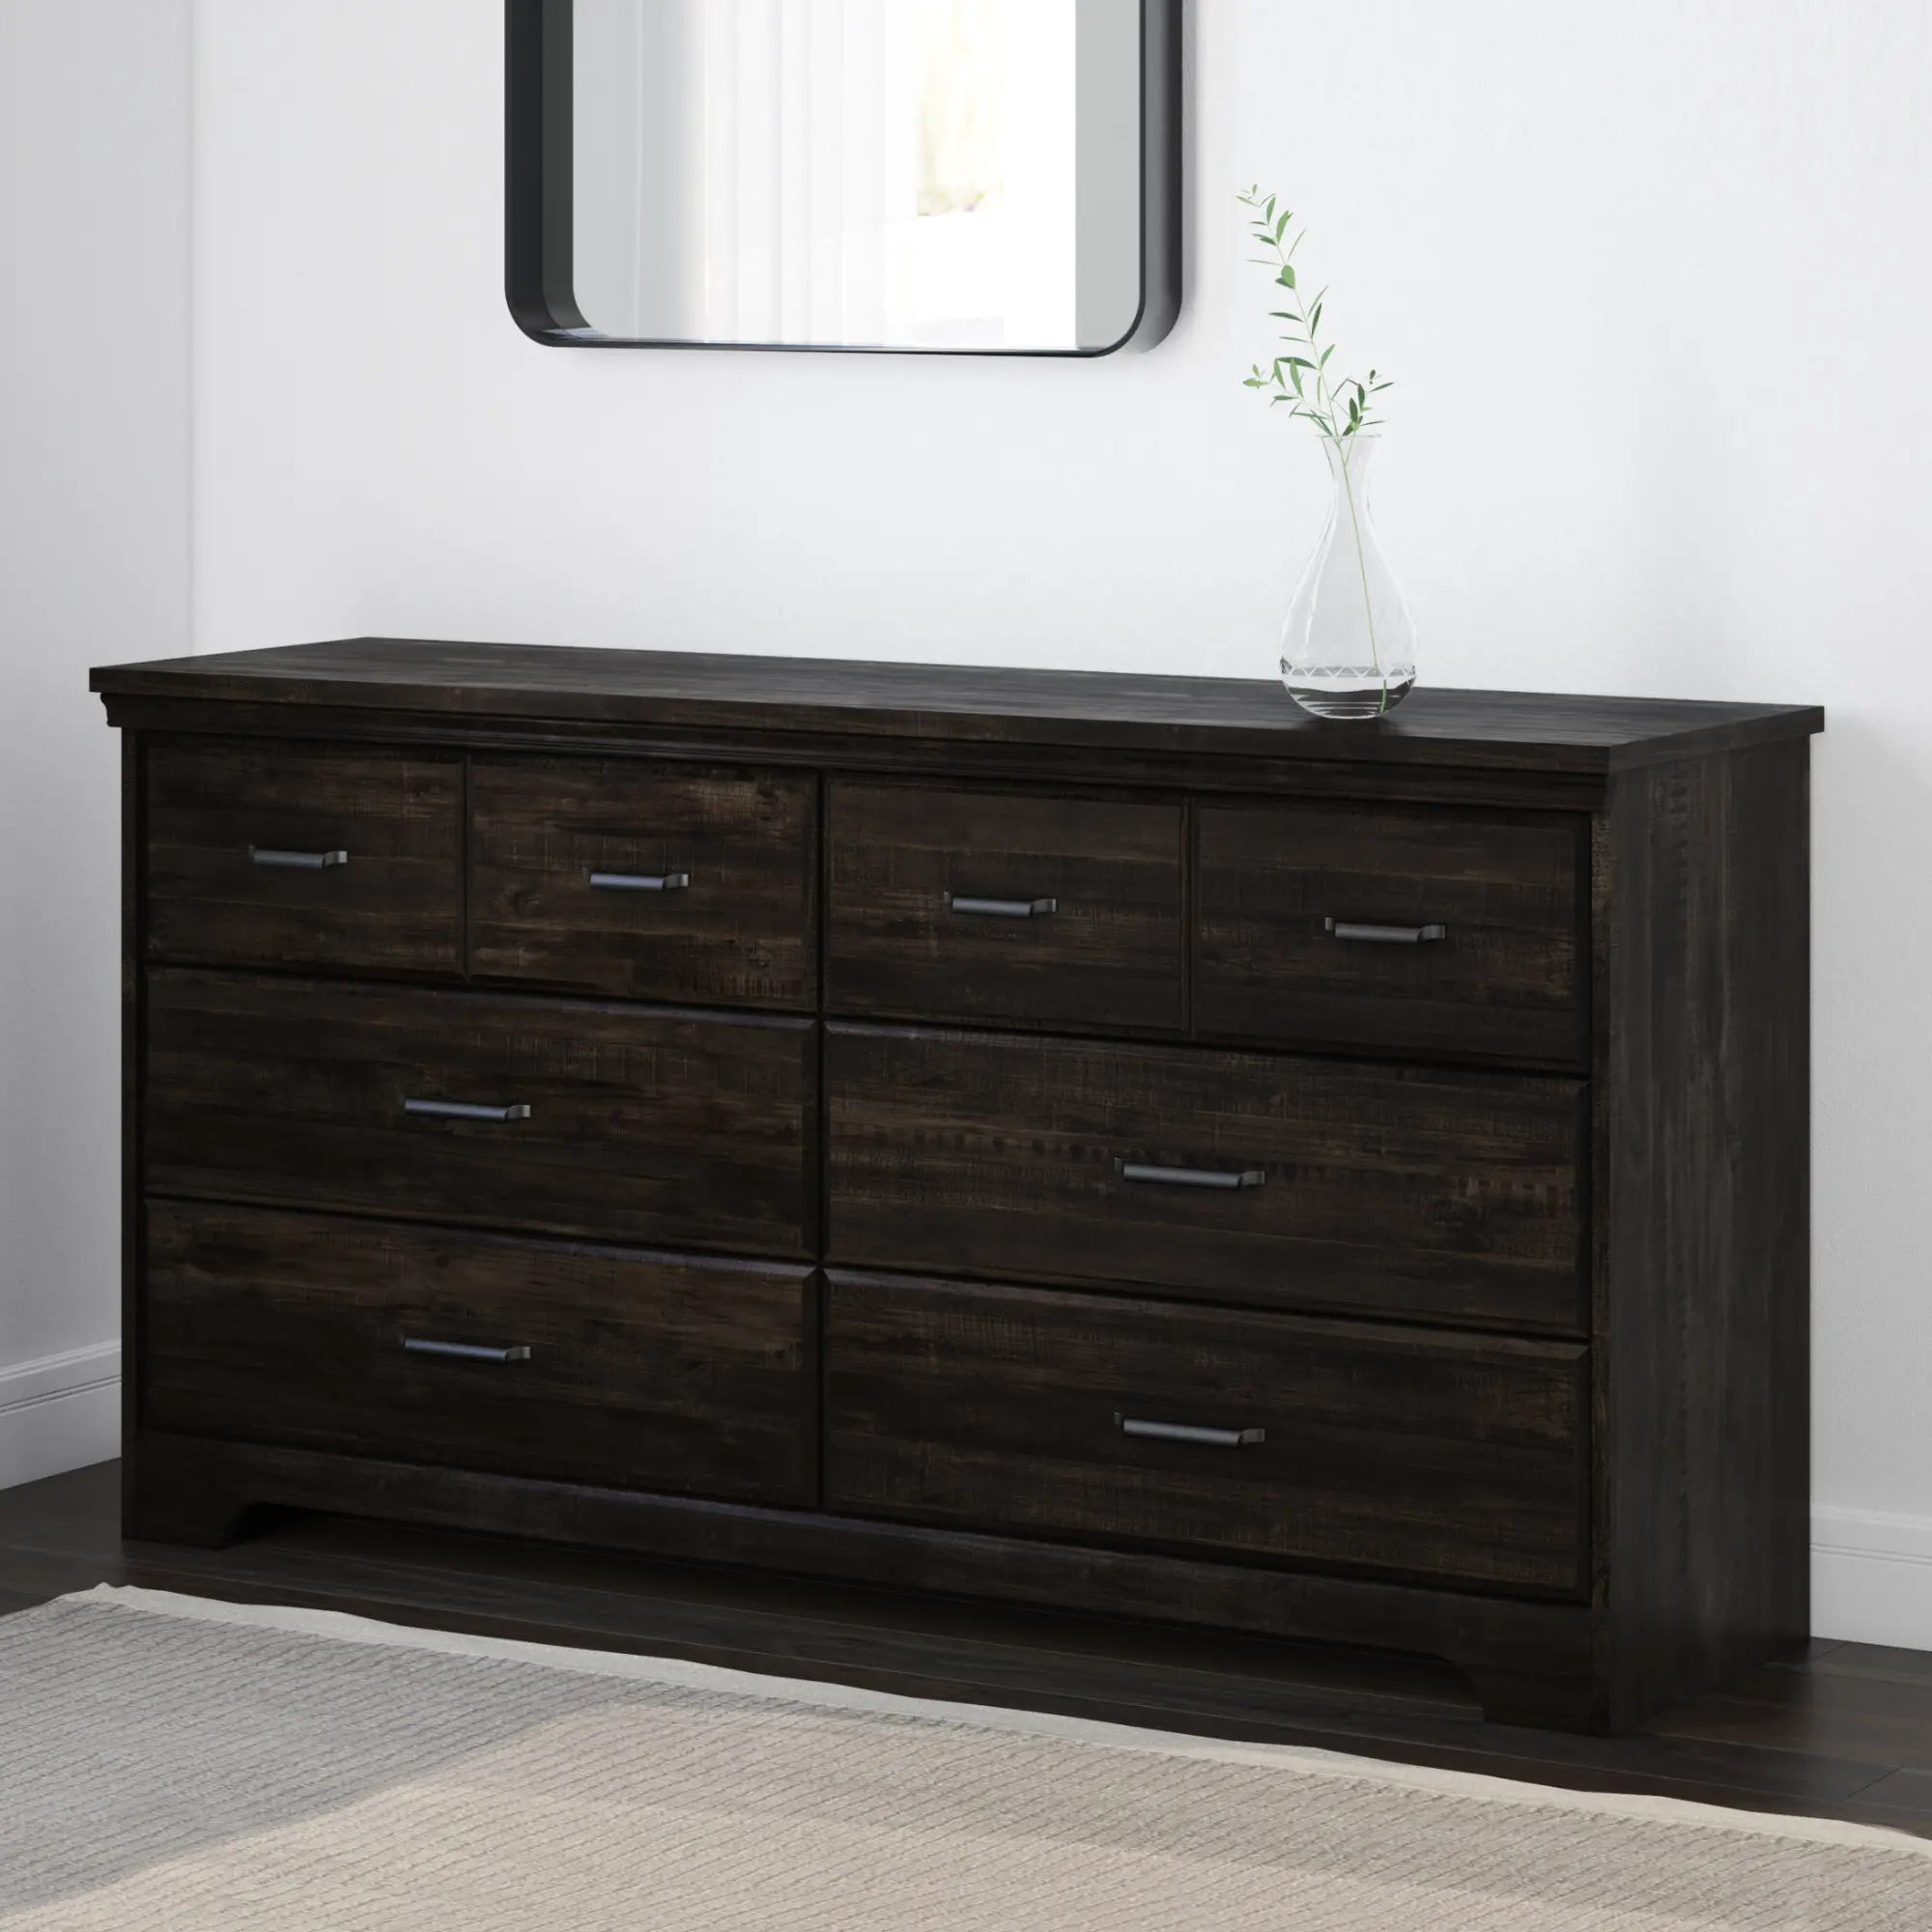 Photos - Dresser / Chests of Drawers South Shore Versa Classic Rubbed Black Dresser - South Shore 13112